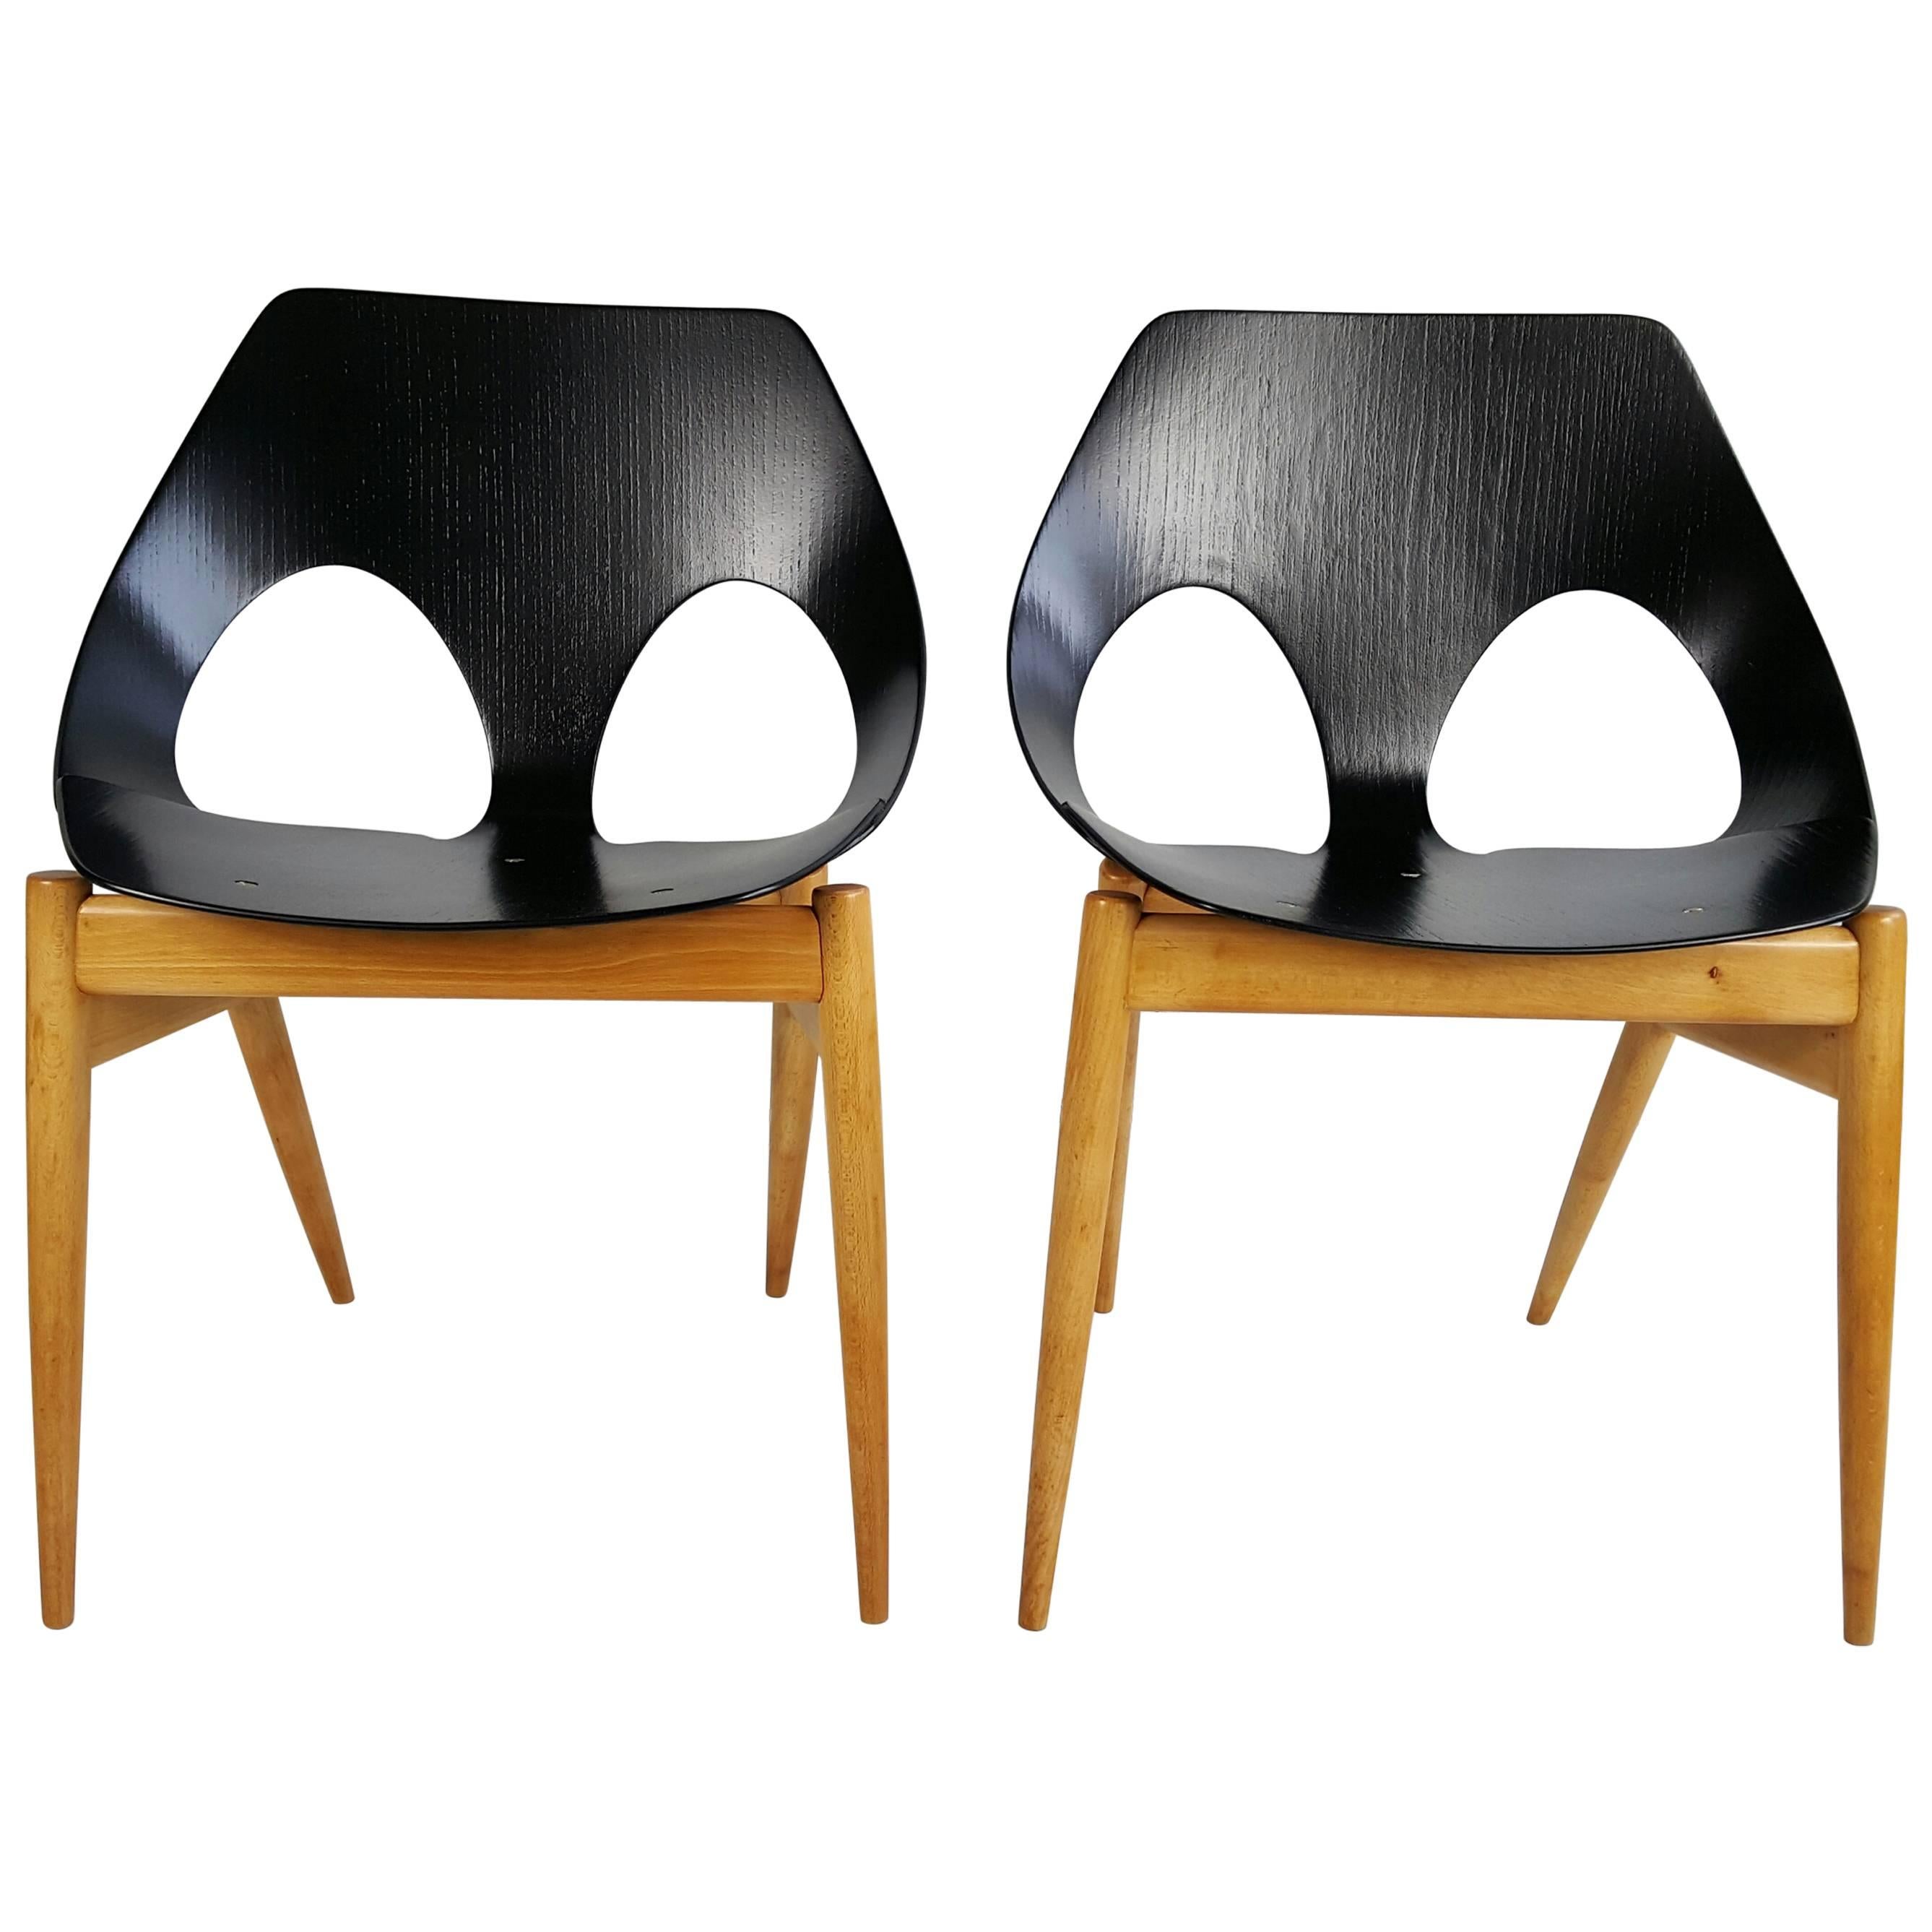 Modernist Pair of Plywood Chairs, Carl Jacob C2 "Jason" for Kandya For Sale